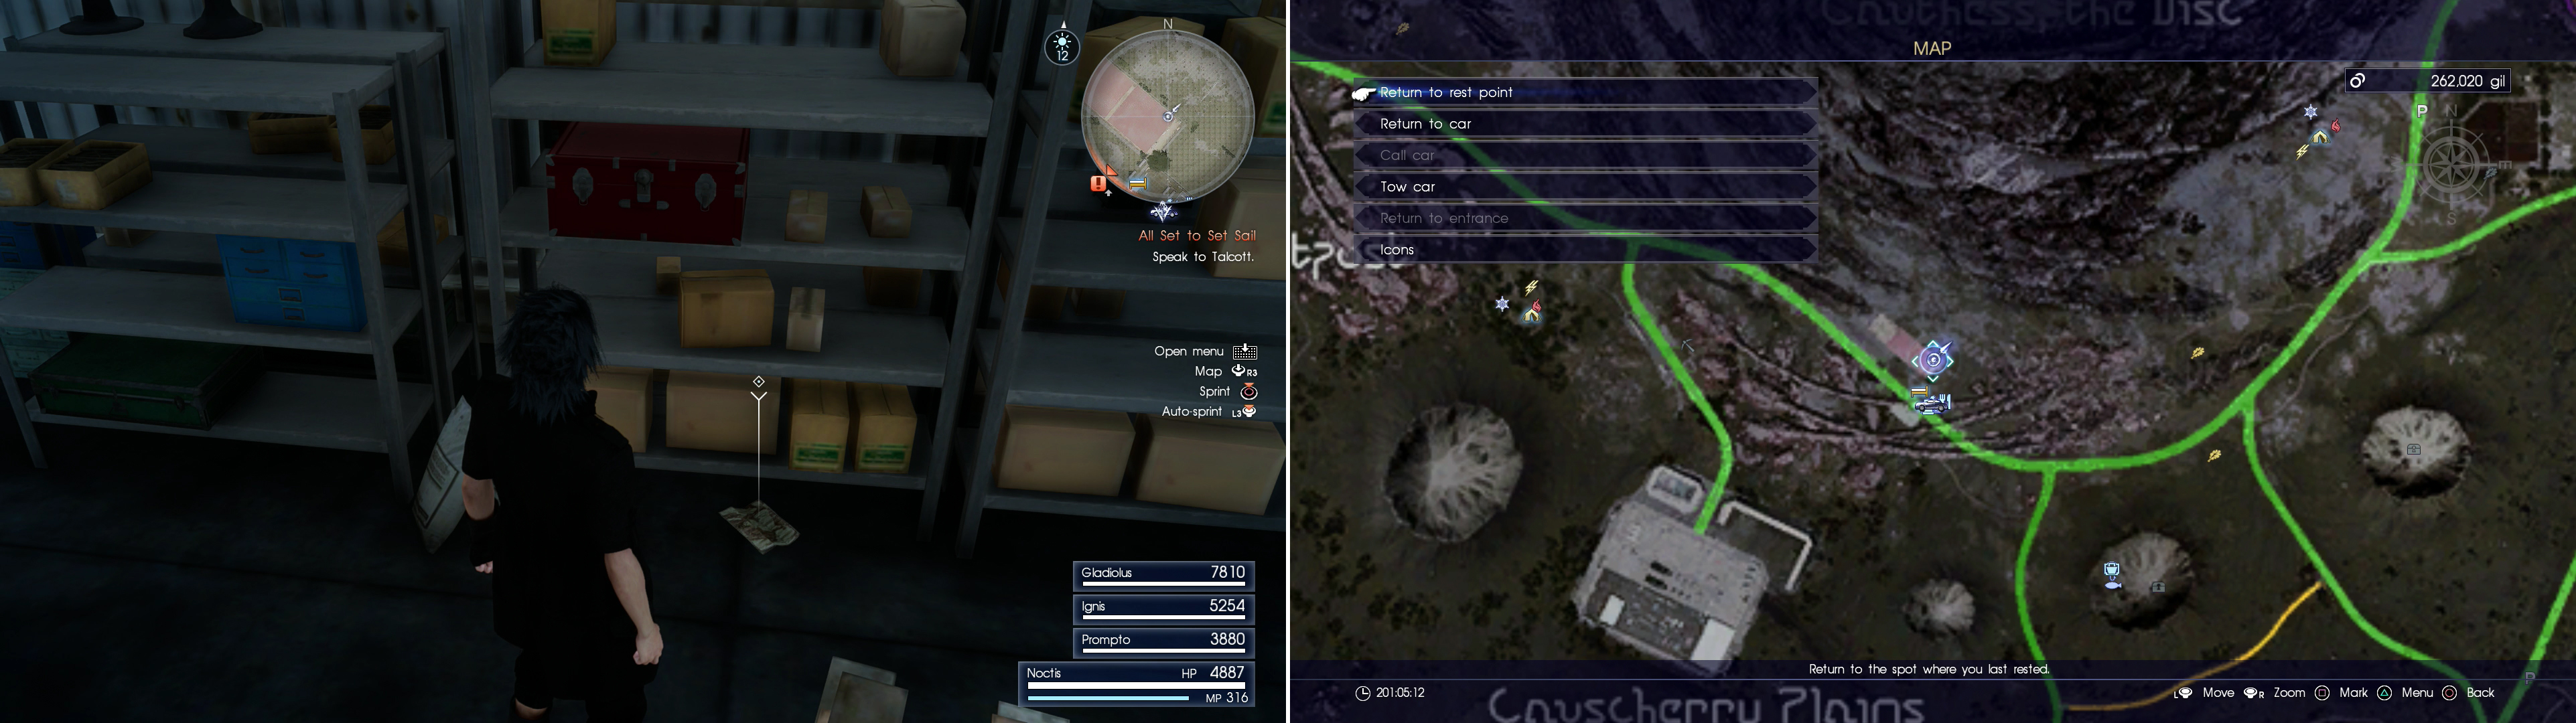 Find Mystery Map VIII in the warehouse near the Cauthess Rest Area (left) at the area indicated on the map (right).